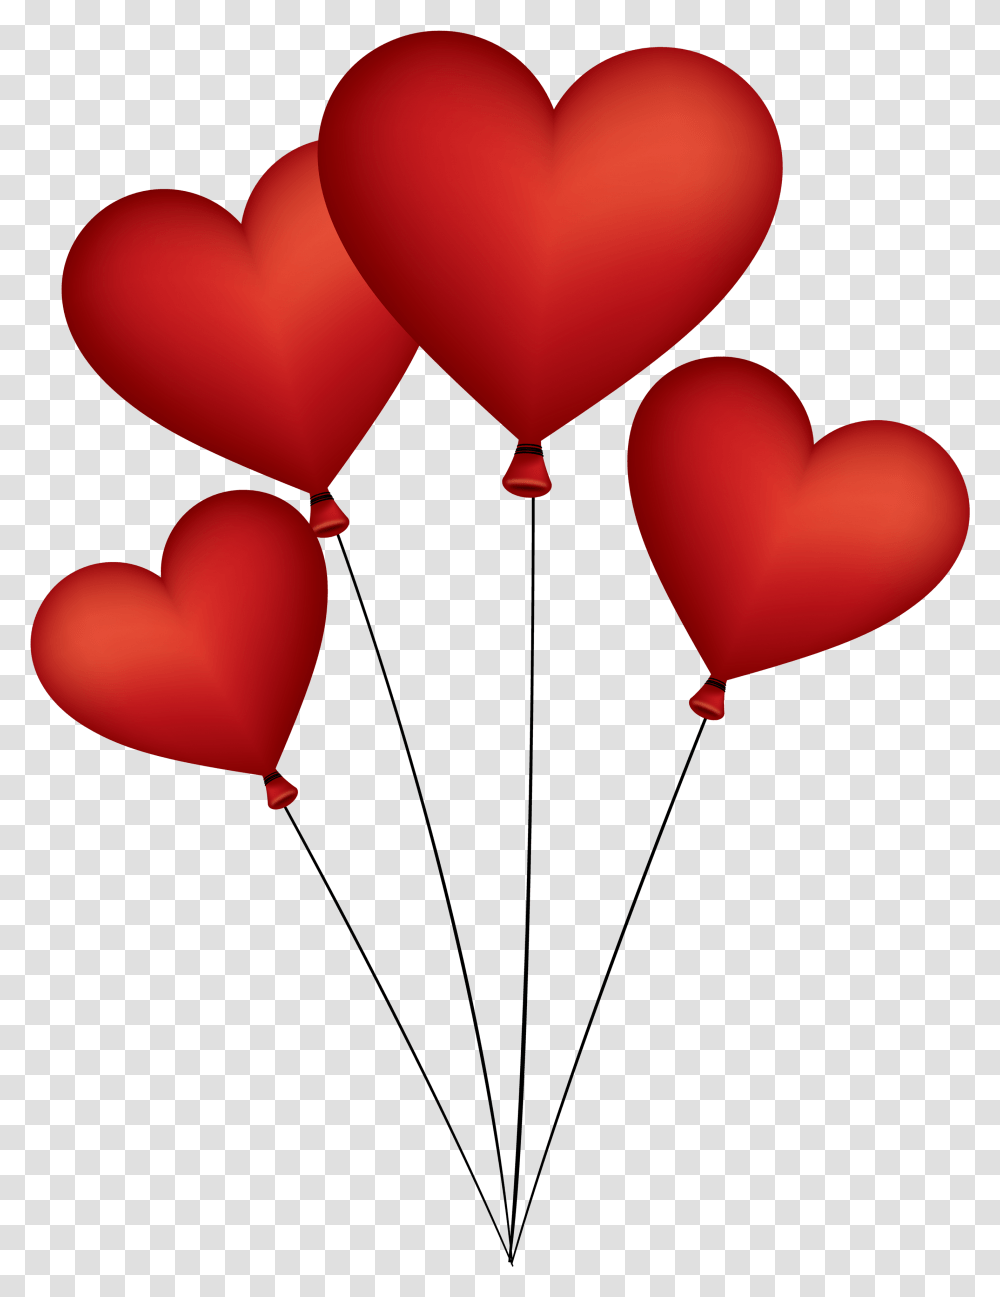 Heart Balloon Image Pngpix Valentines Day White Background Transparent Png